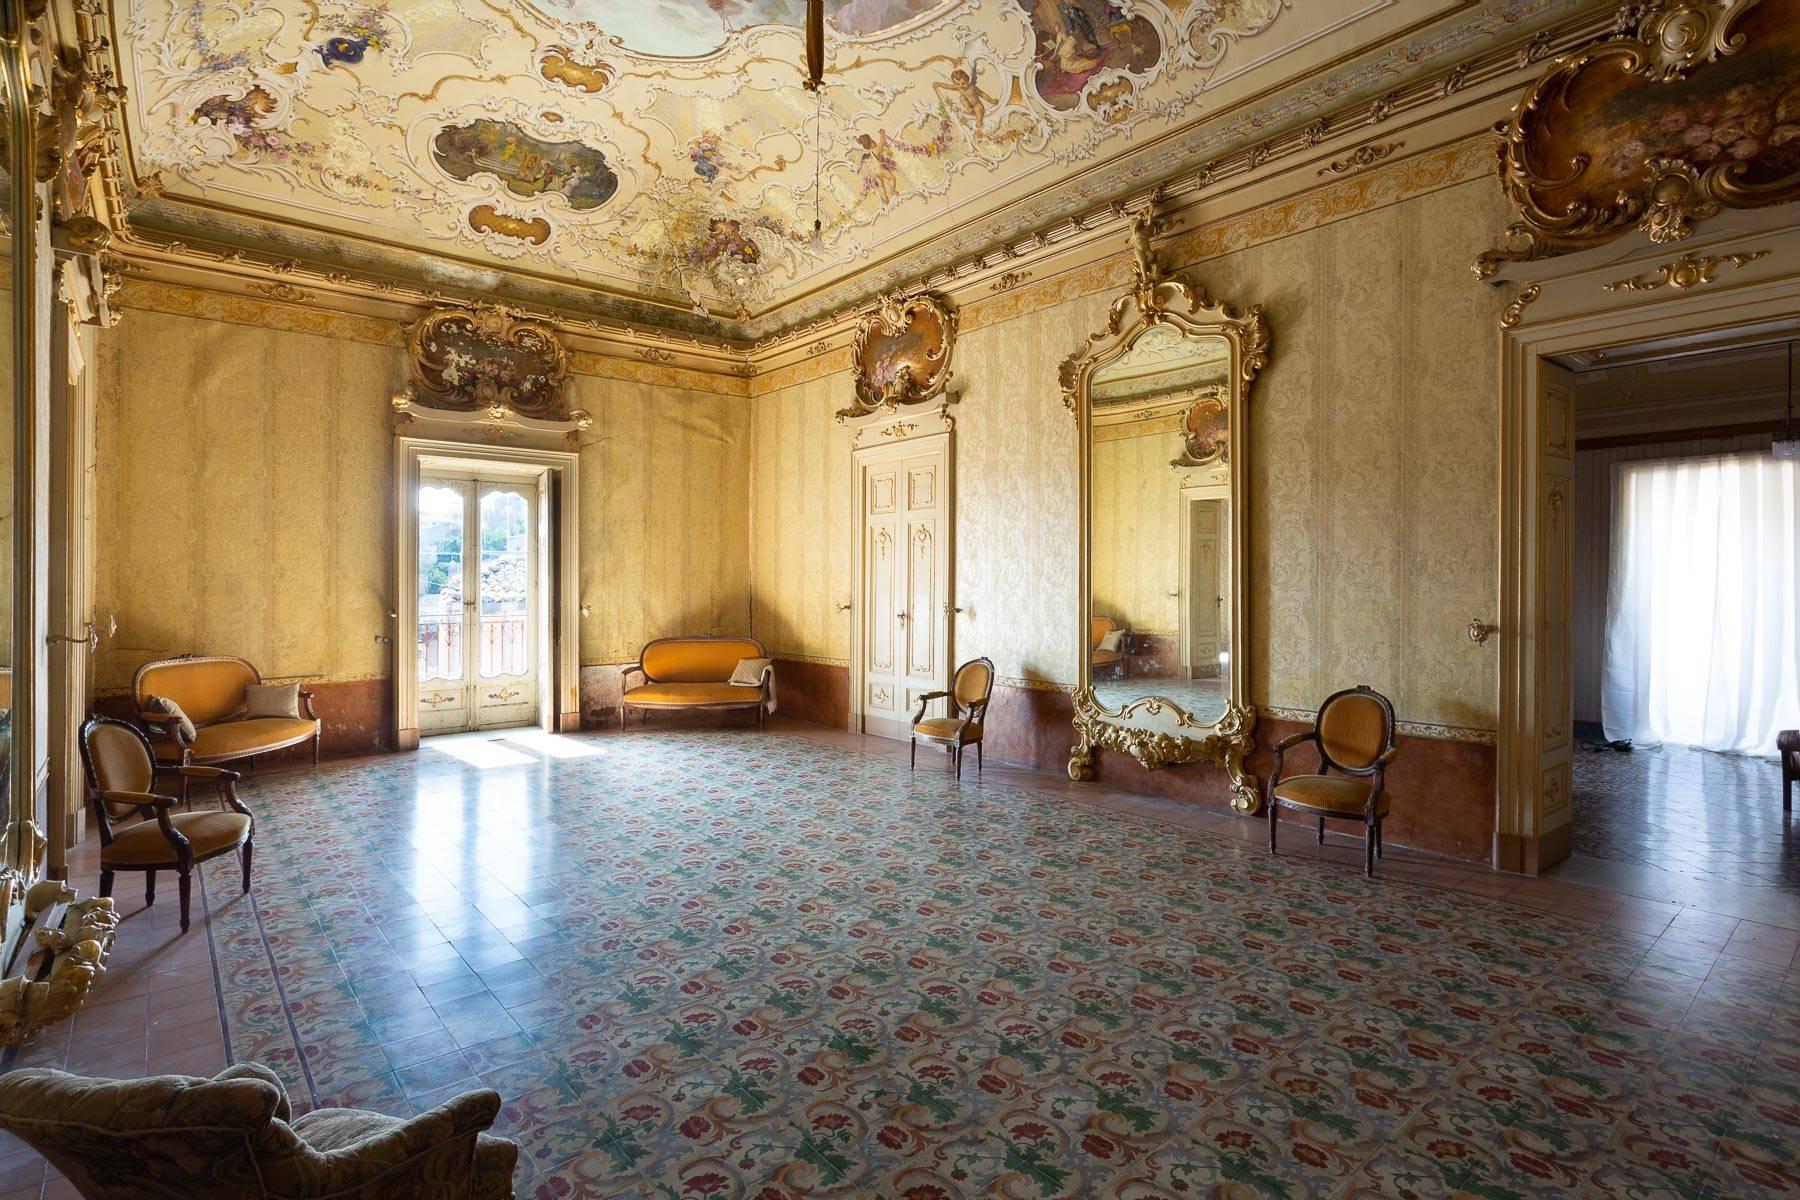 Noble Palace in Palazzolo Acreide - 3